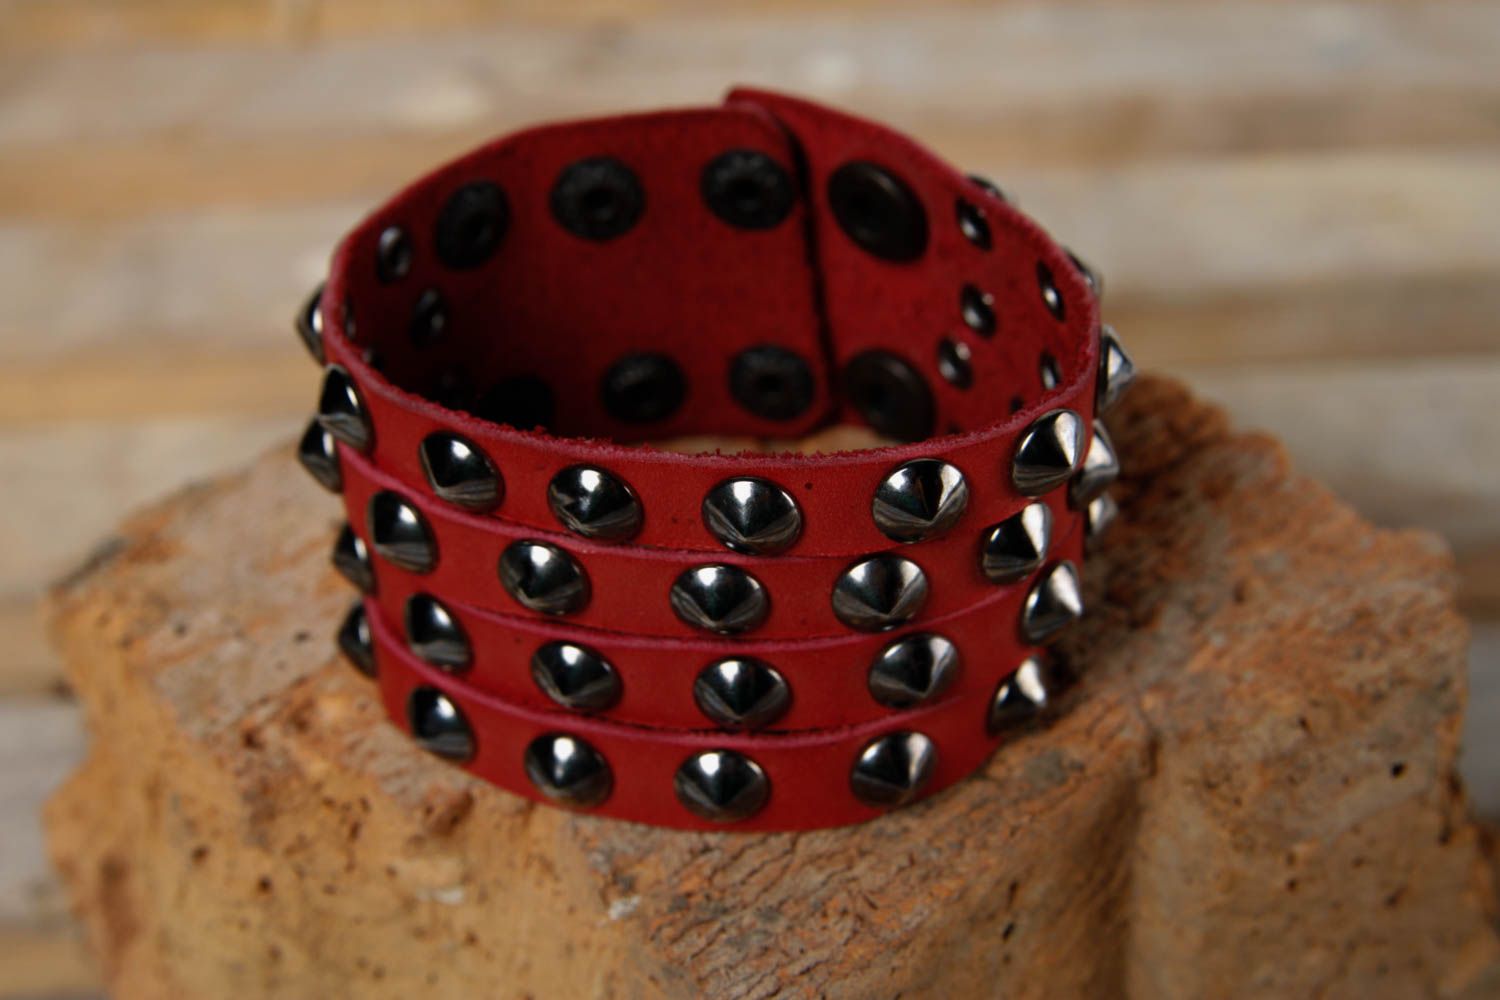 Handmade wide leather bracelet unisex jewelry designs fashion trends small gifts photo 1